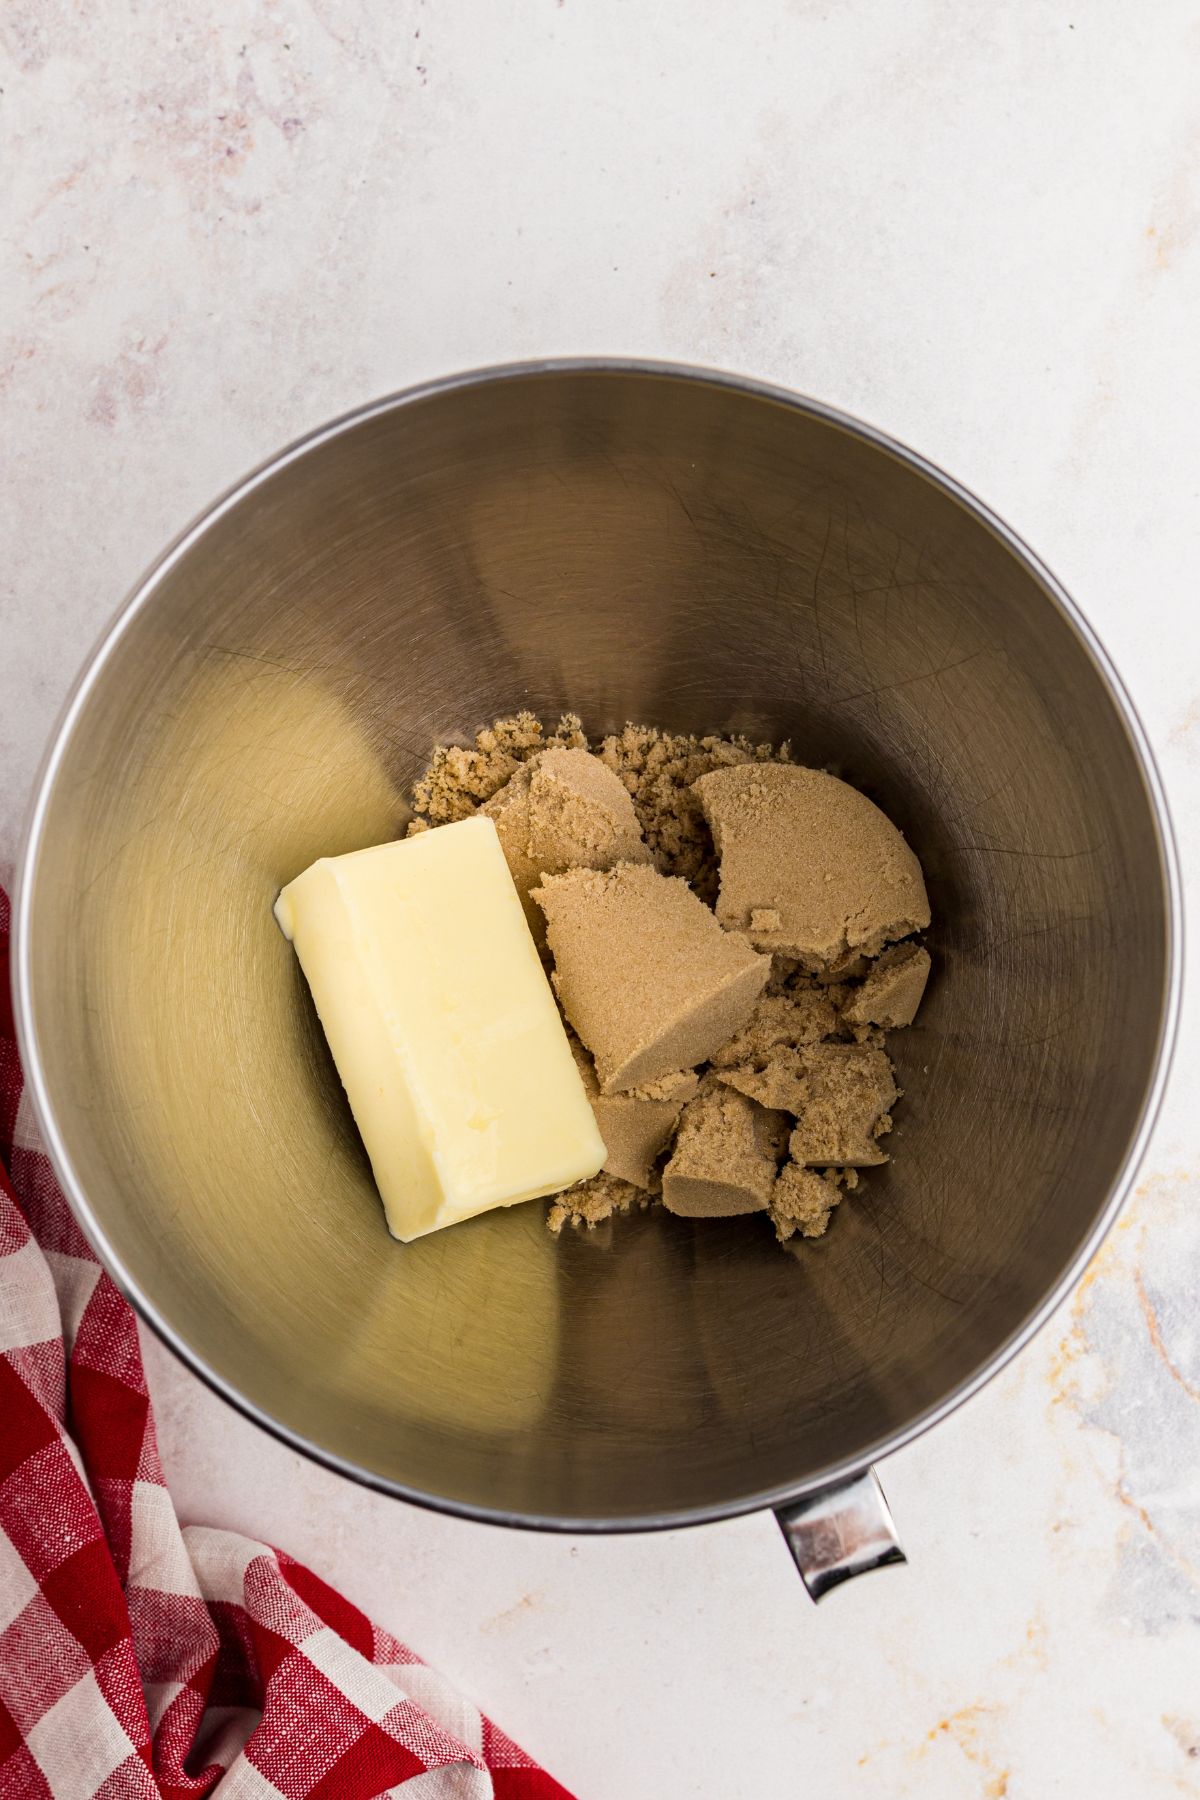 Butter and brown sugar being added to a mixing bowl